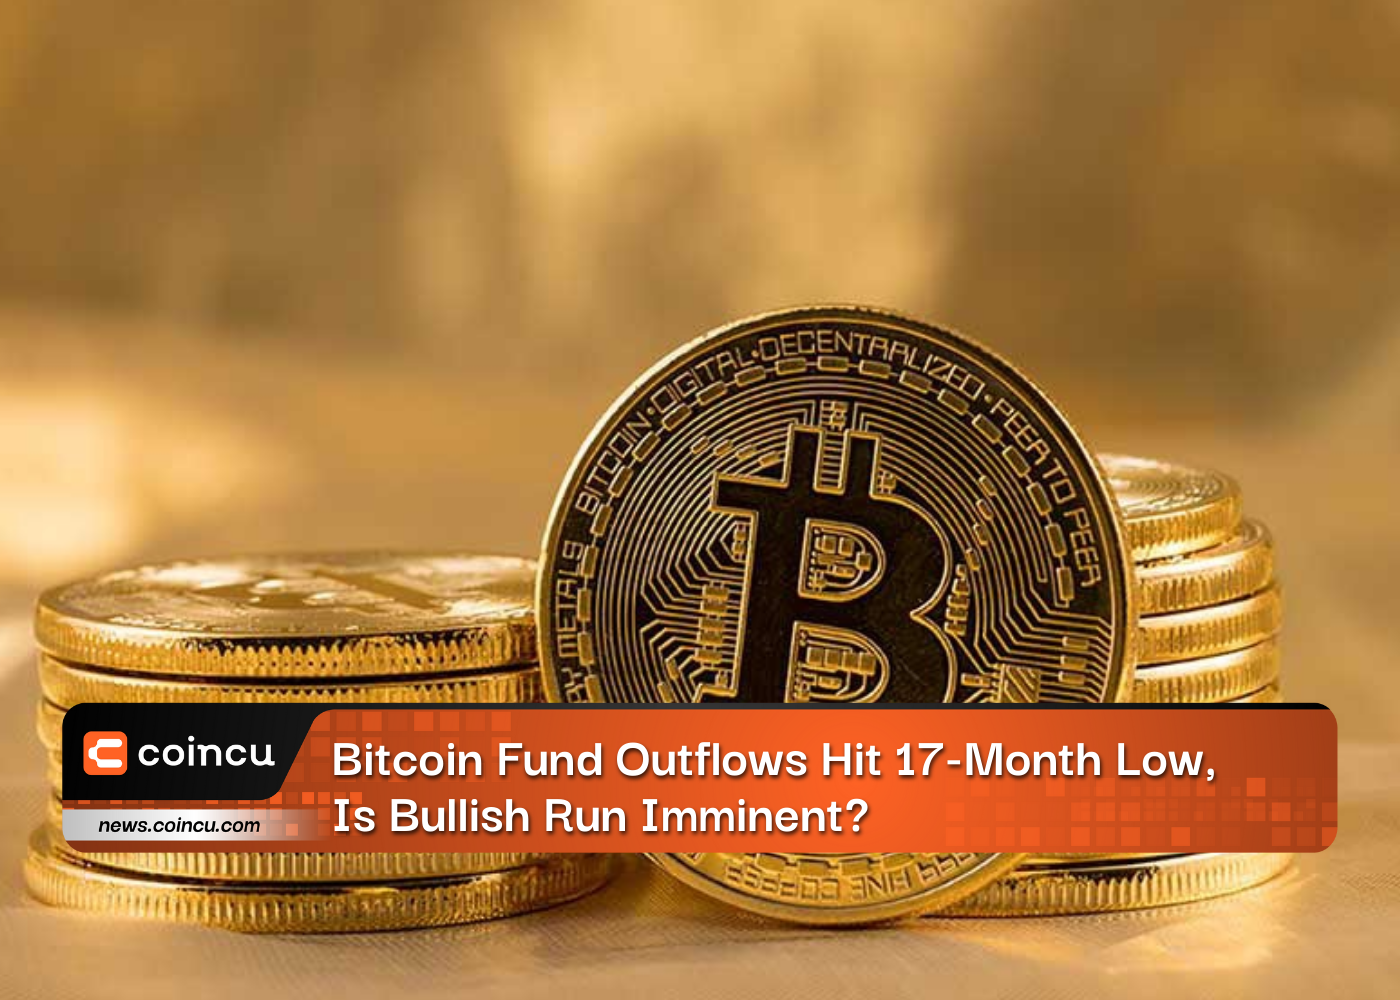 Bitcoin Fund Outflows Hit 17-Month Low, Is Bullish Run Imminent?